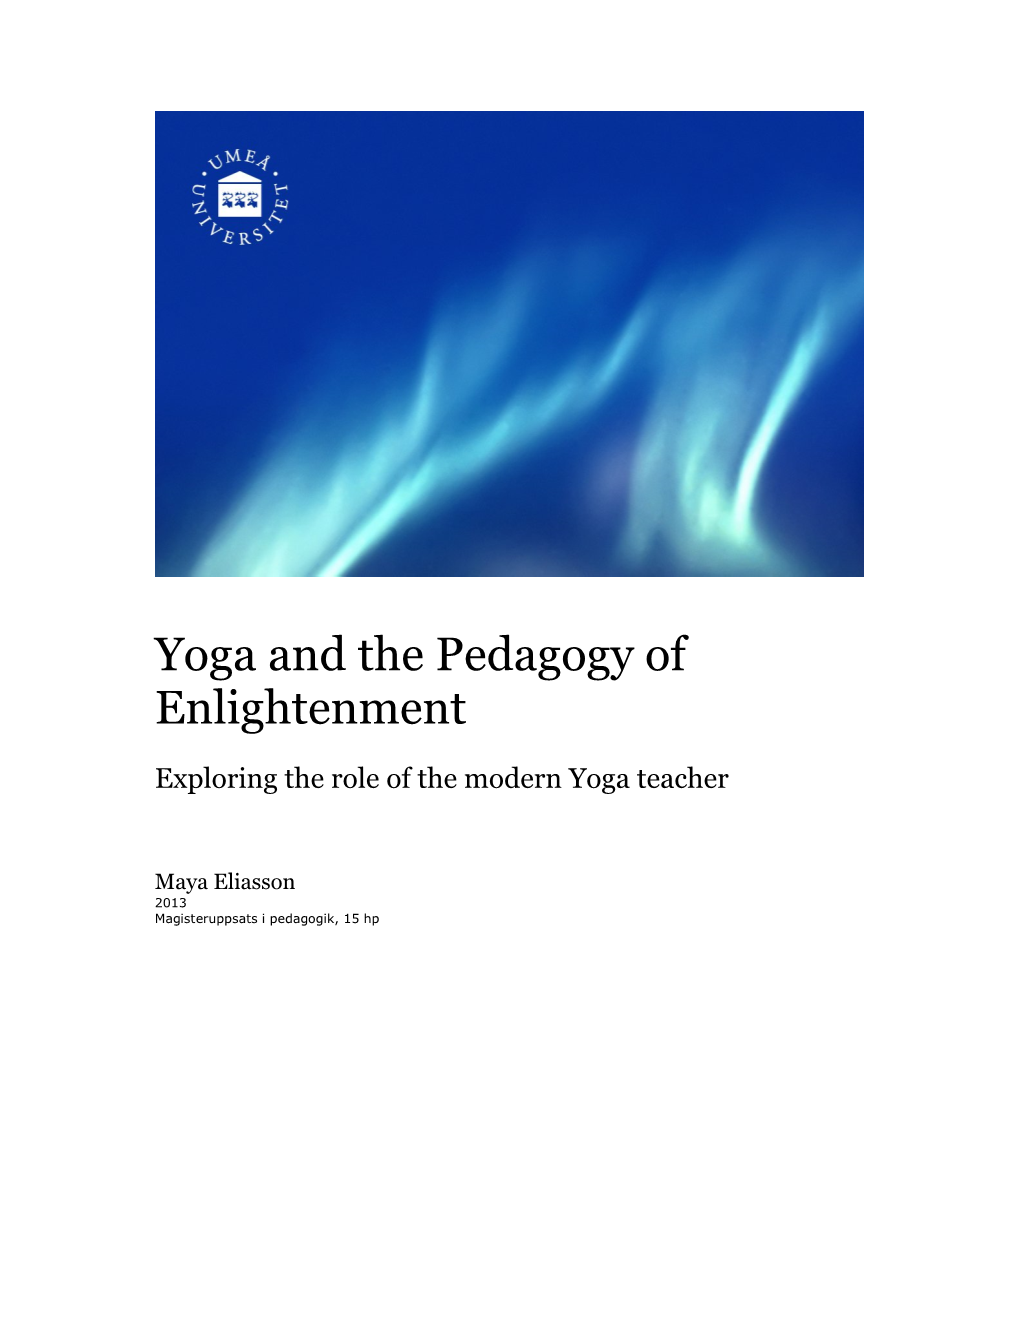 Yoga and the Pedagogy of Enlightenment